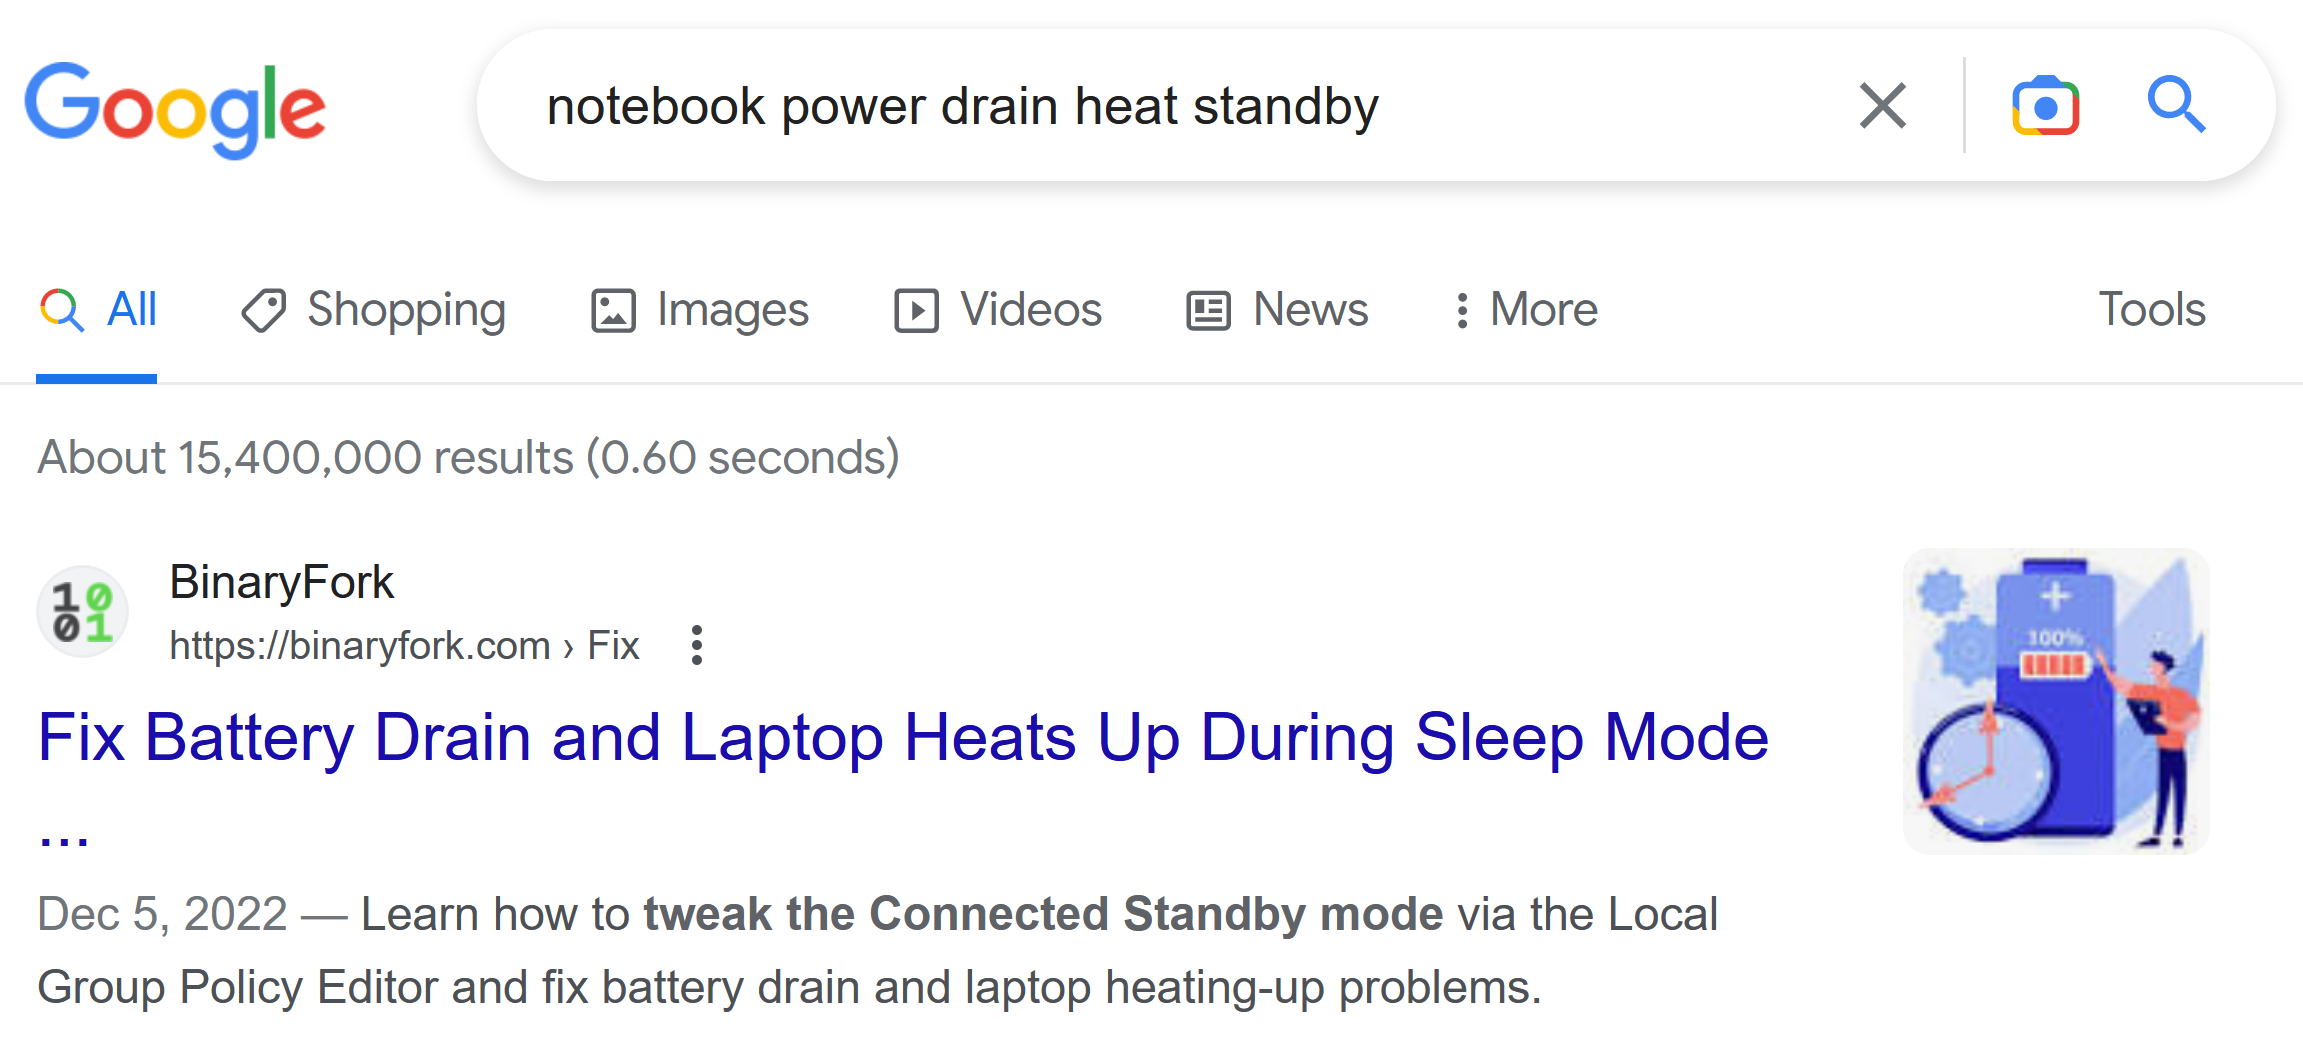 Screenshot of Google search, looking for: notebook power drain heat standby